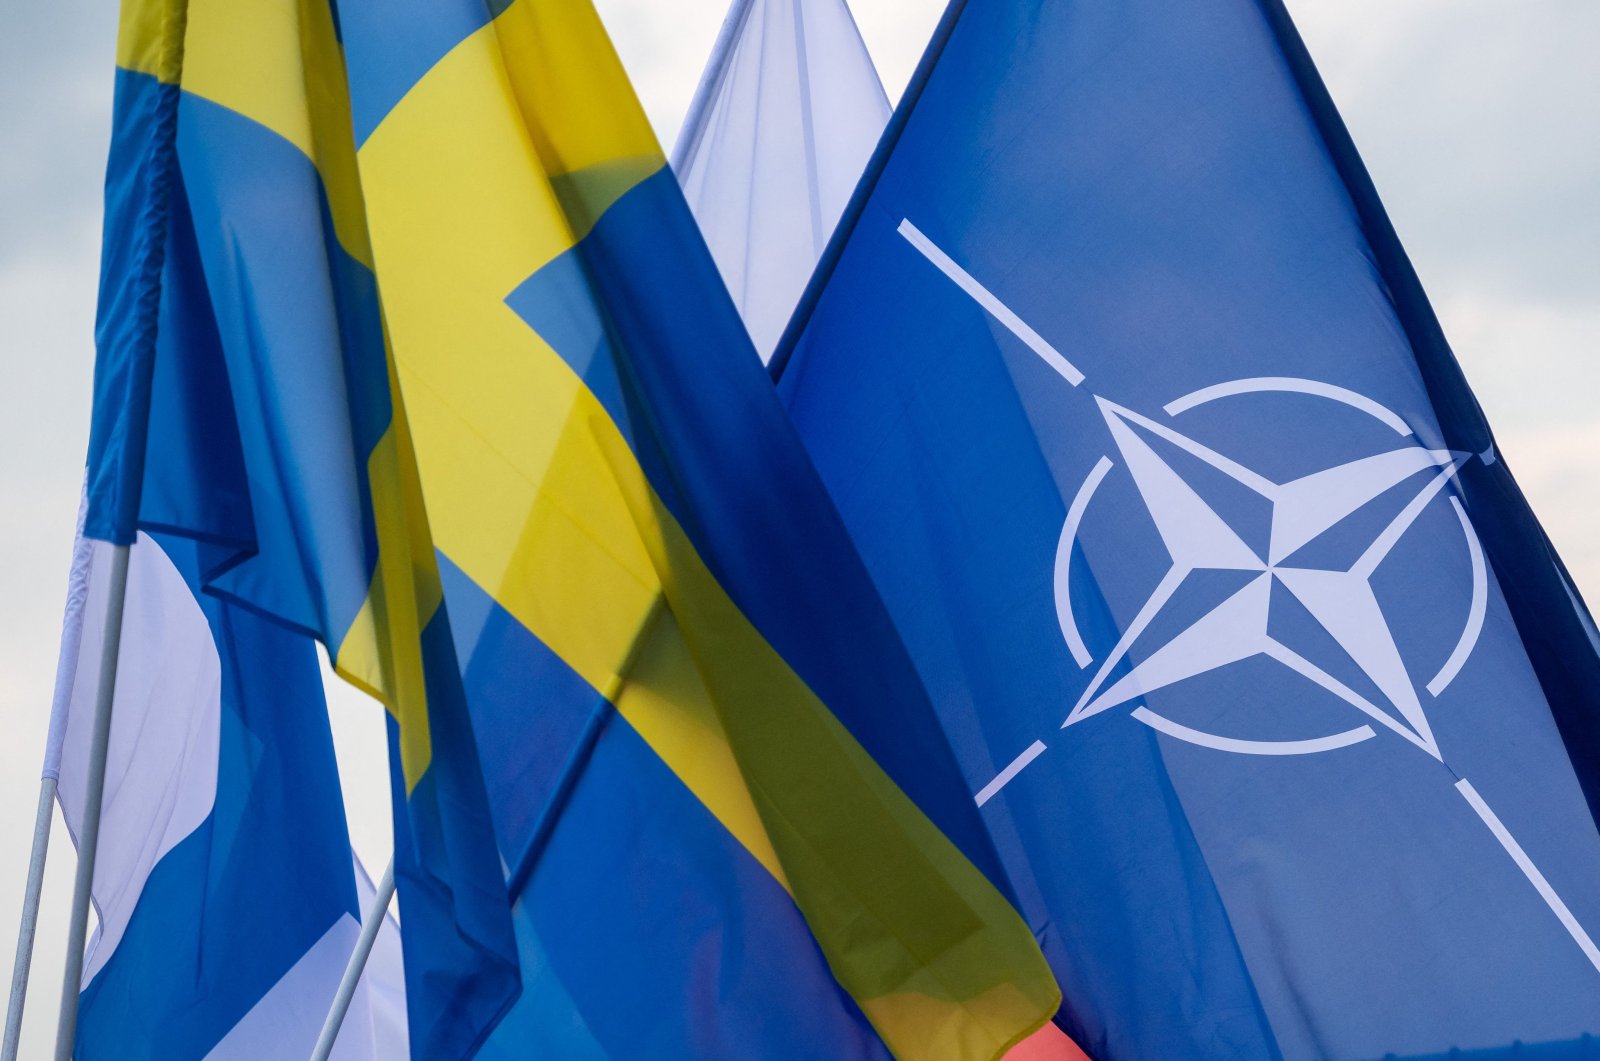 Swedish, Finnish and NATO flags can be seen on board the Polish Navy frigate ORP Kosciuszko in Gdynia, Poland, July 22, 2022. (AFP Photo)